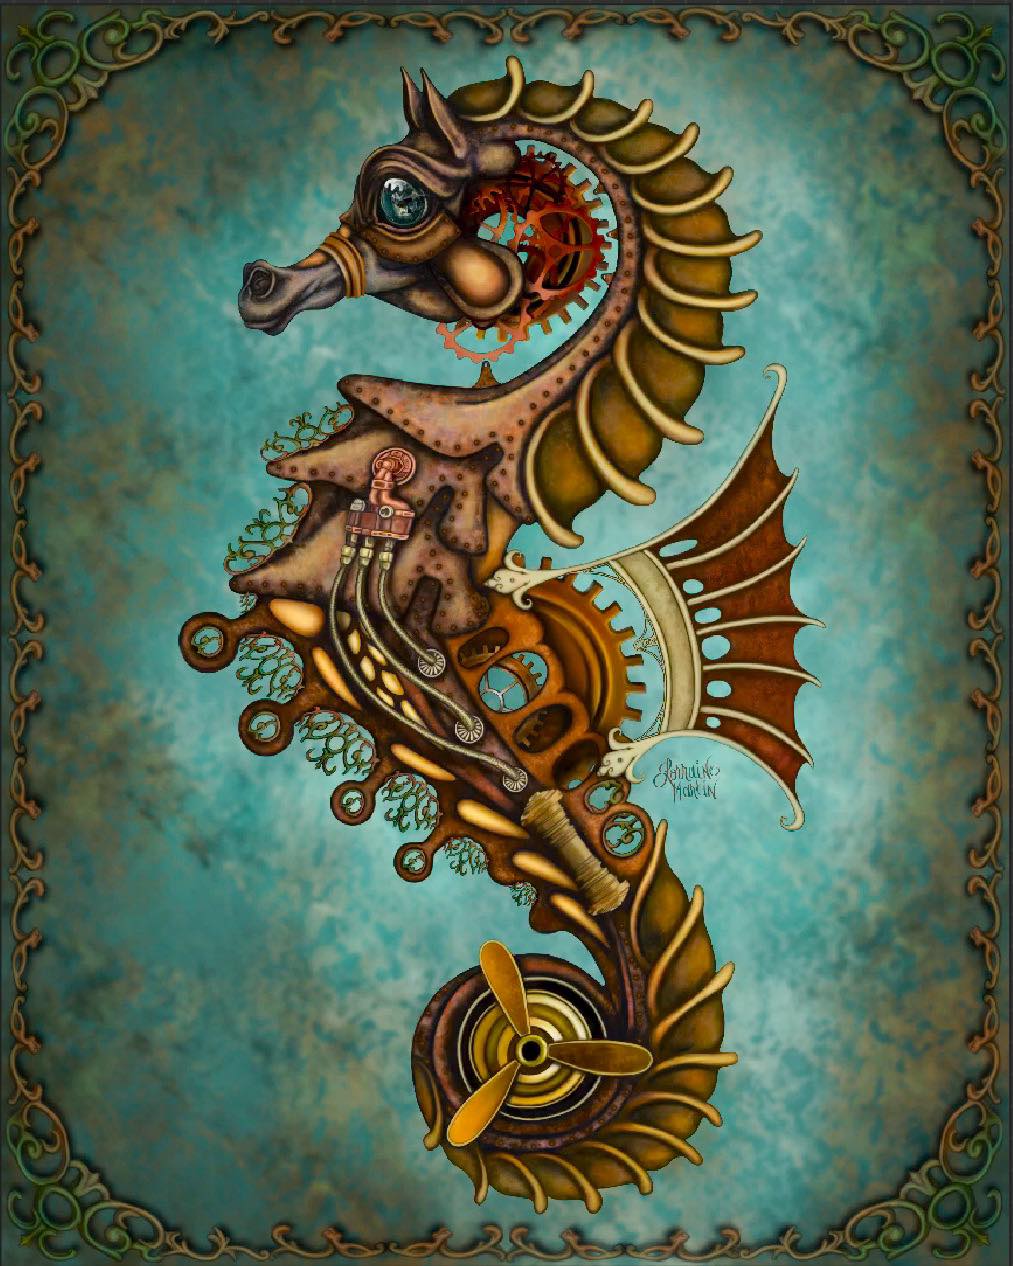 Steampunk Seahorse Giclee Canvas Print - The Butterfrog